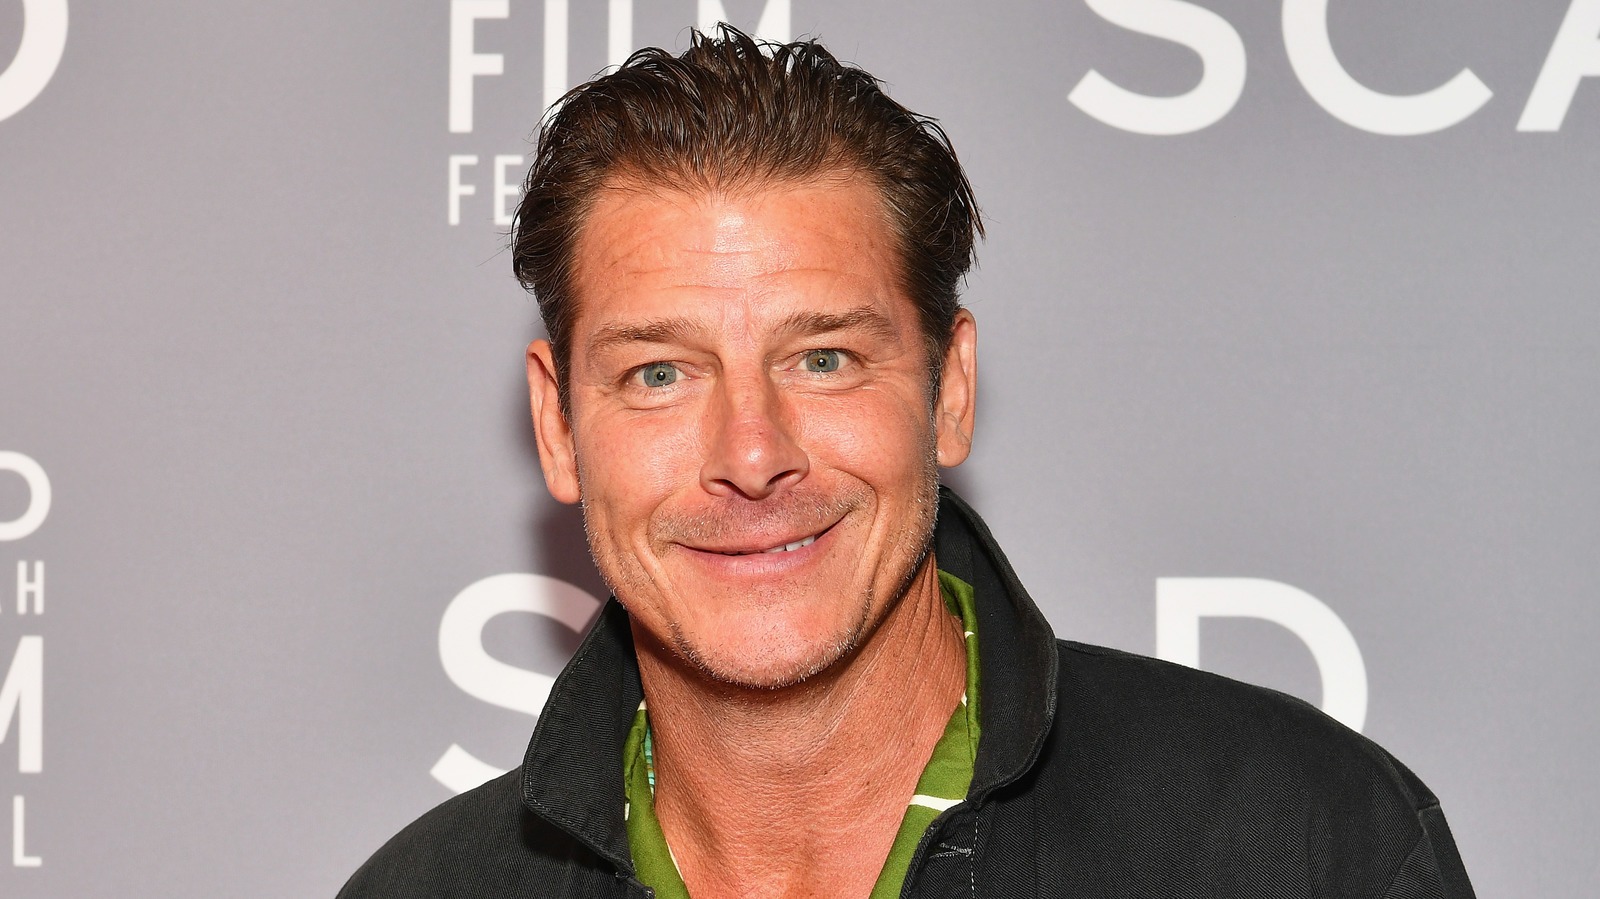 Ty Pennington is a television host, artist, carpenter, author, model, and f...